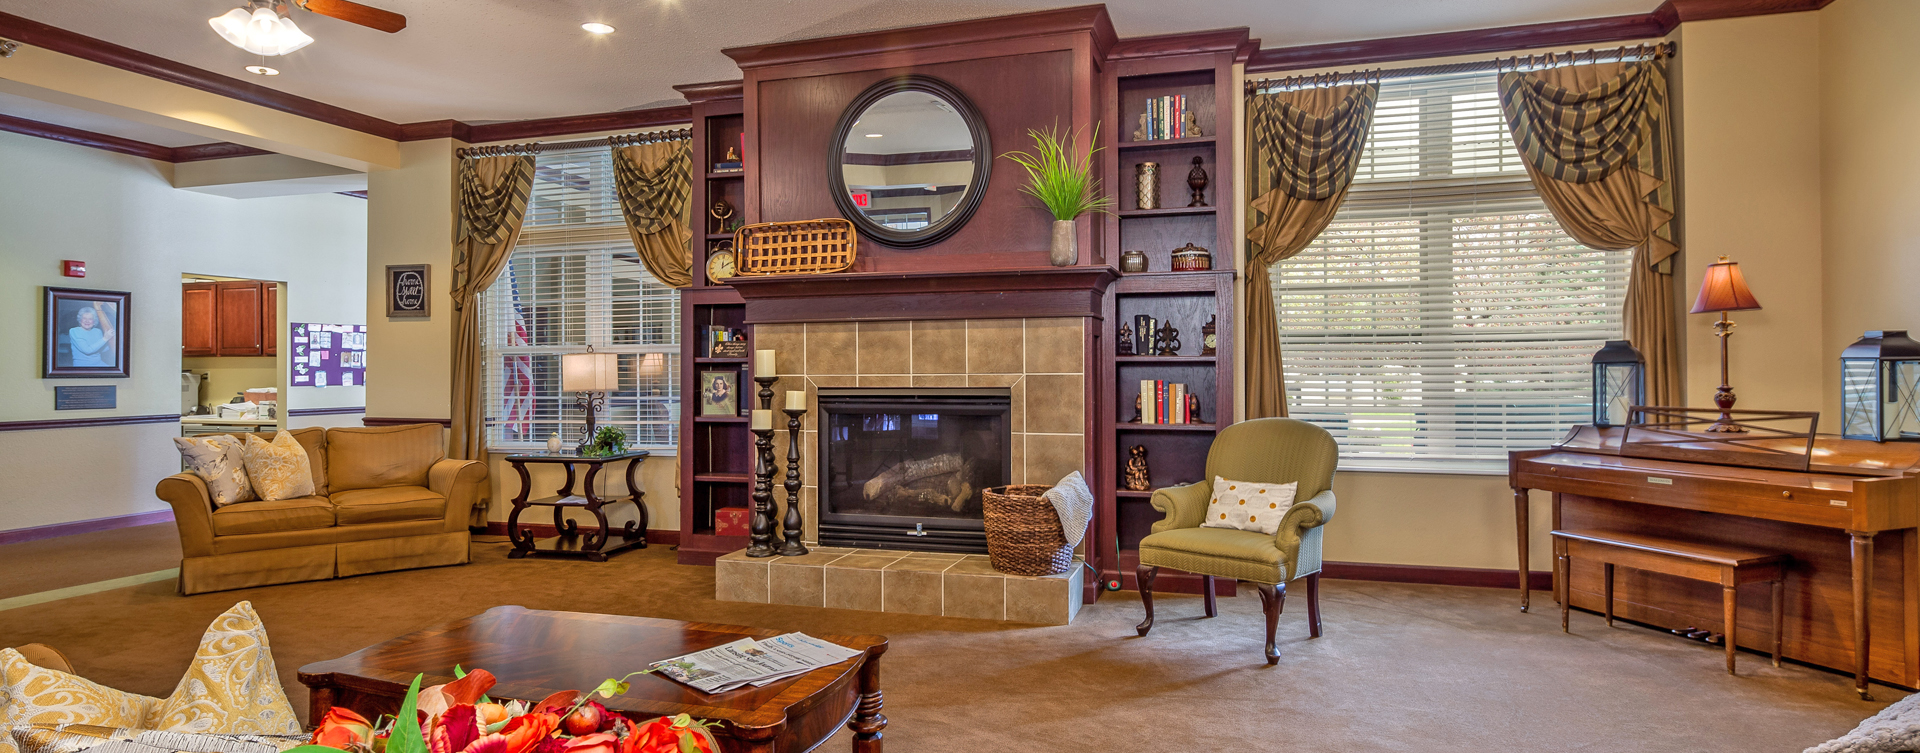 Socialize with friends in the living room at Bickford of Okemos